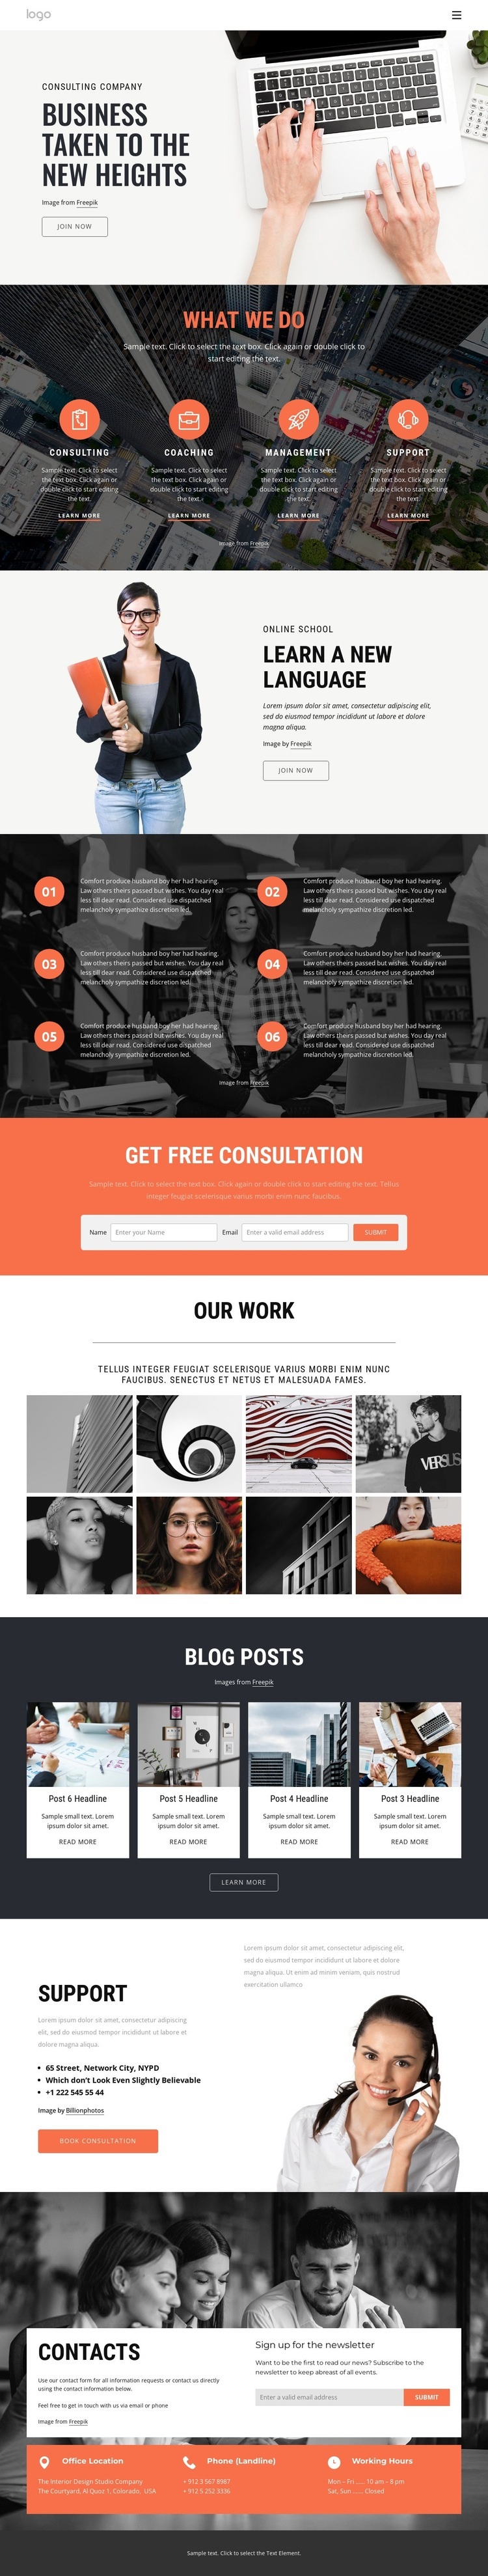 How consulting helps to speed up success Webflow Template Alternative